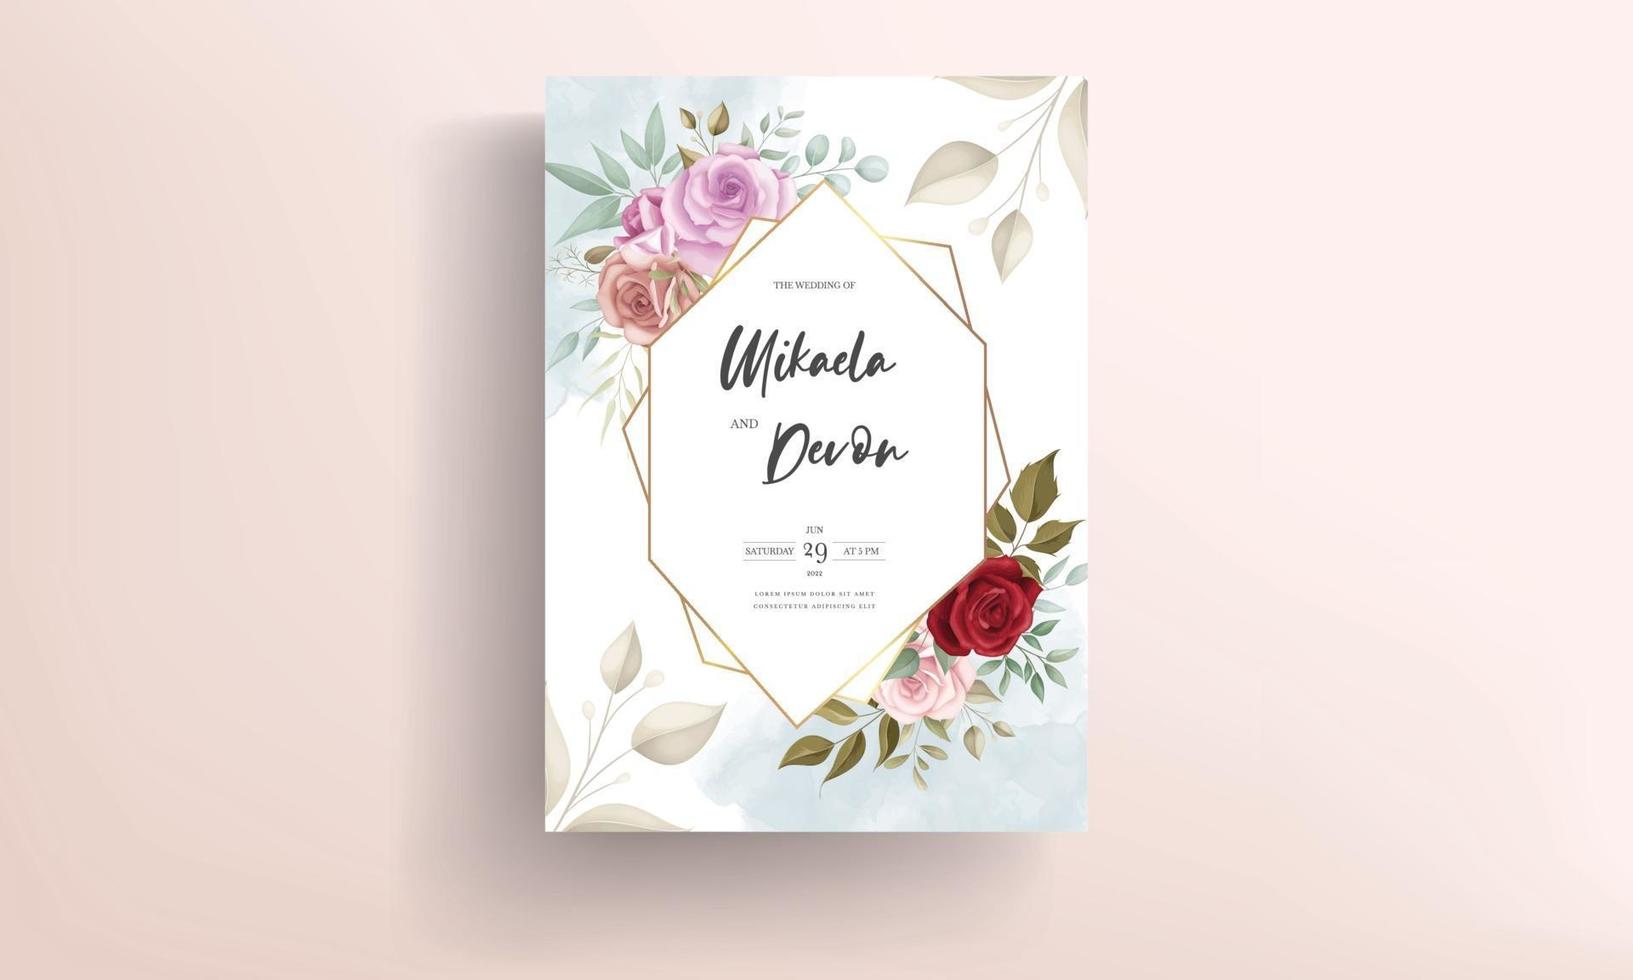 Elegant wedding invitation card with beautiful floral ornaments vector